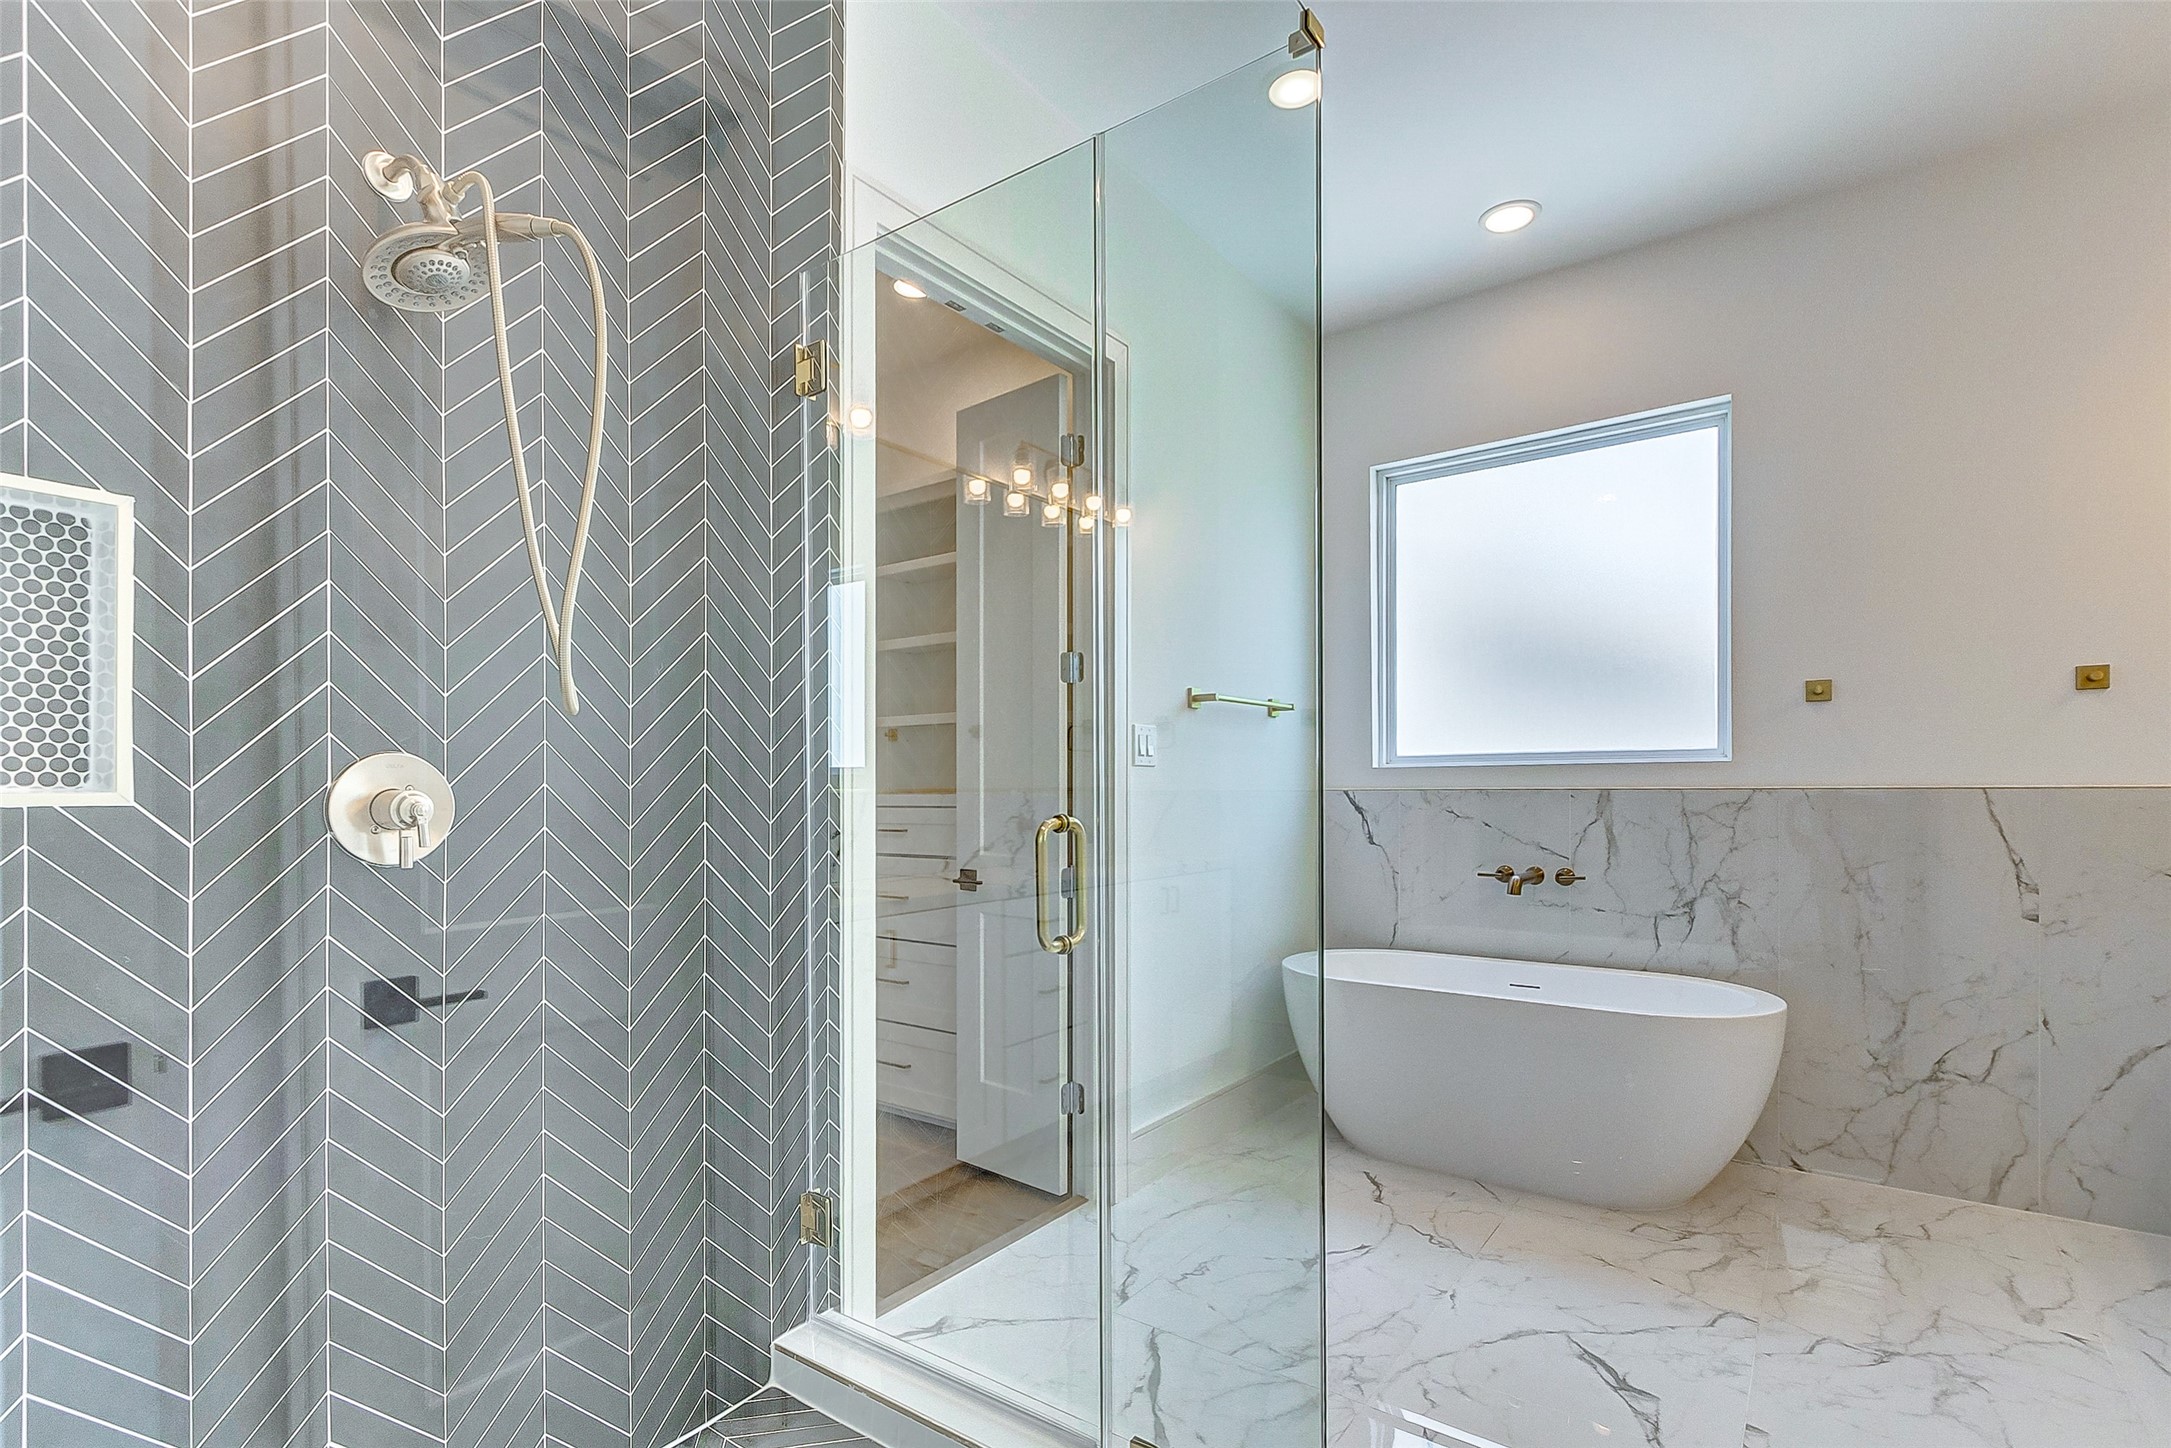 Step into your private primary ensuite bathroom to enjoy the luxe amenities offered. Features include white counters with coordinating white cabinets, dual vanities, gold hardware, a large mirror with vanity lighting, linen closet, privately tucked away commode, soaking tub, and walk-in shower.